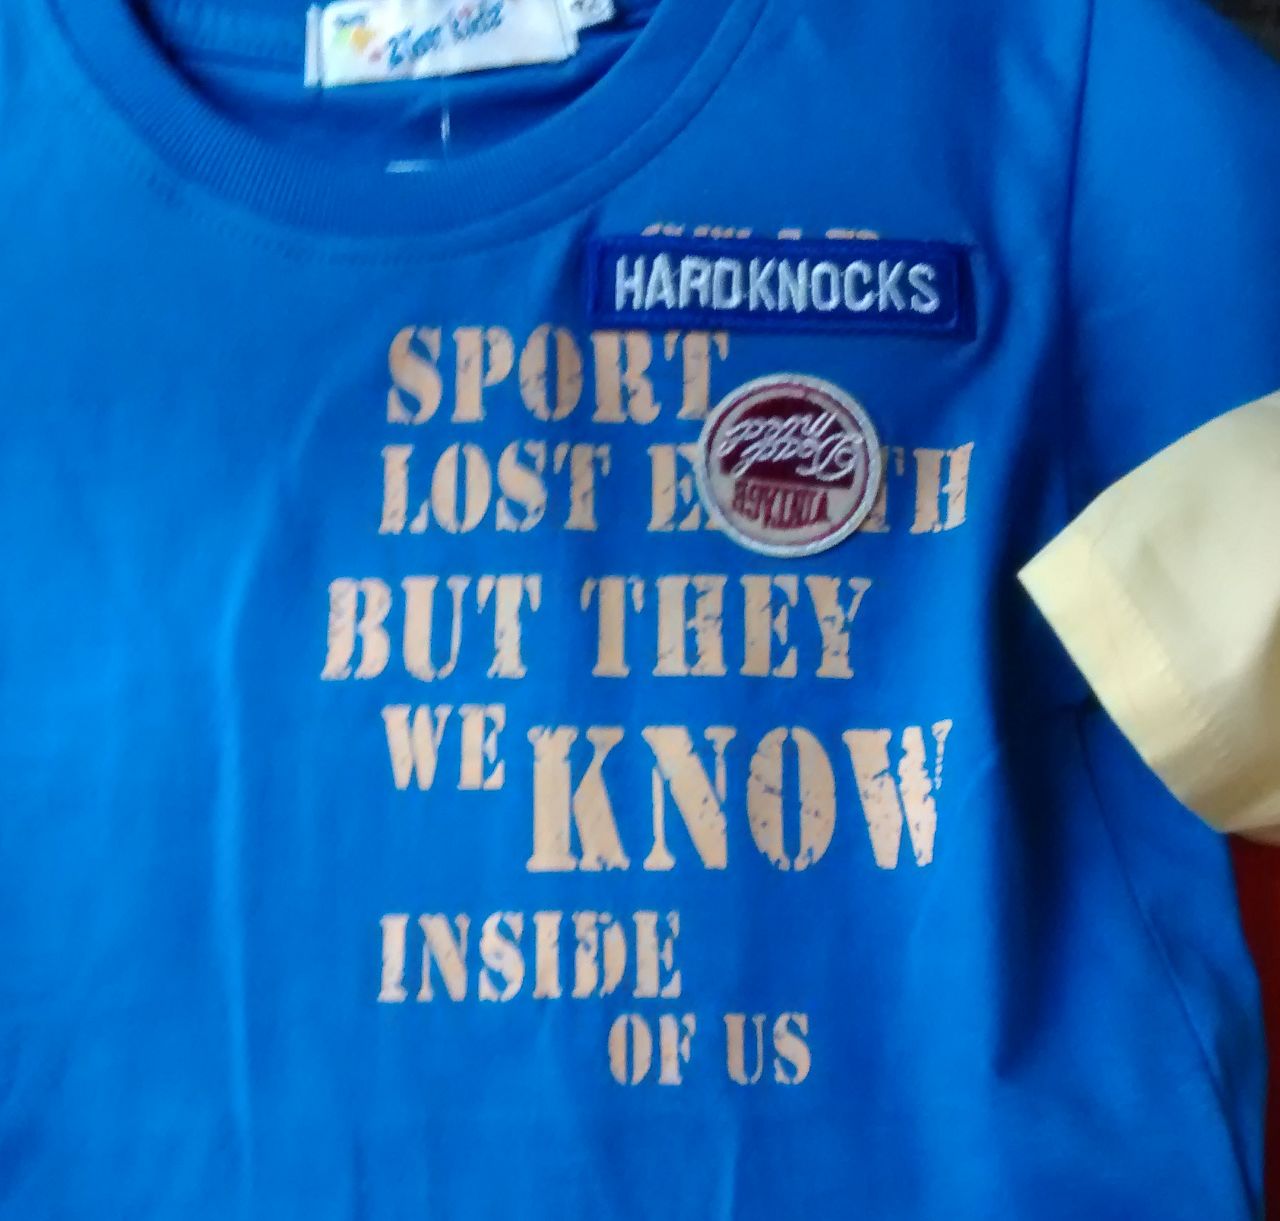 Hardknocks sport lost e*h but they we know inside of us